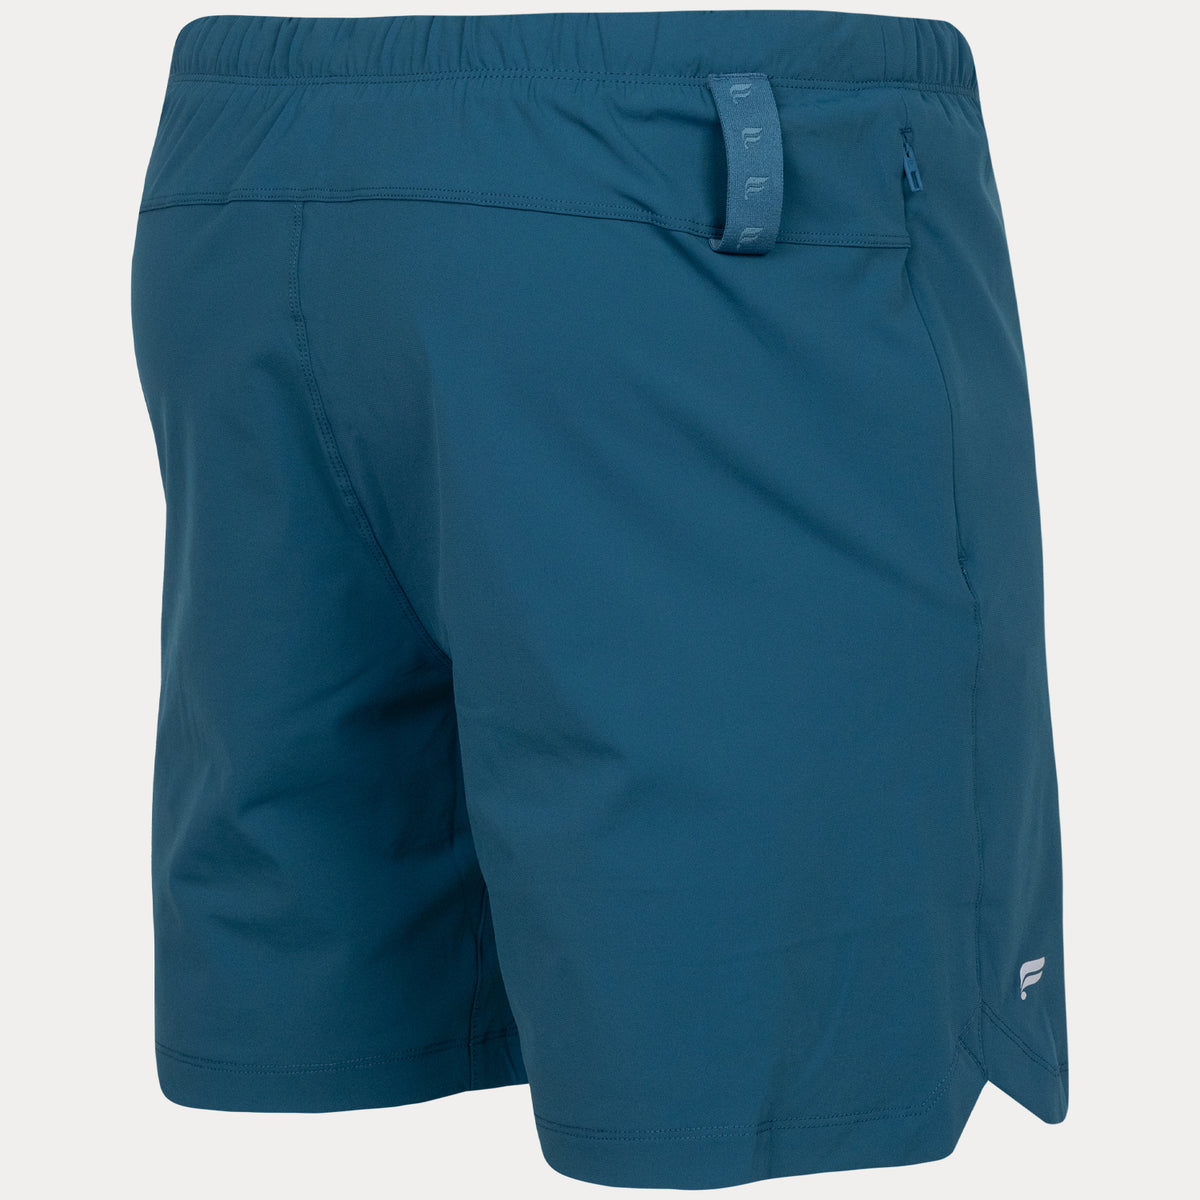 rear view of dark blue short showing loop under waistband on right rear